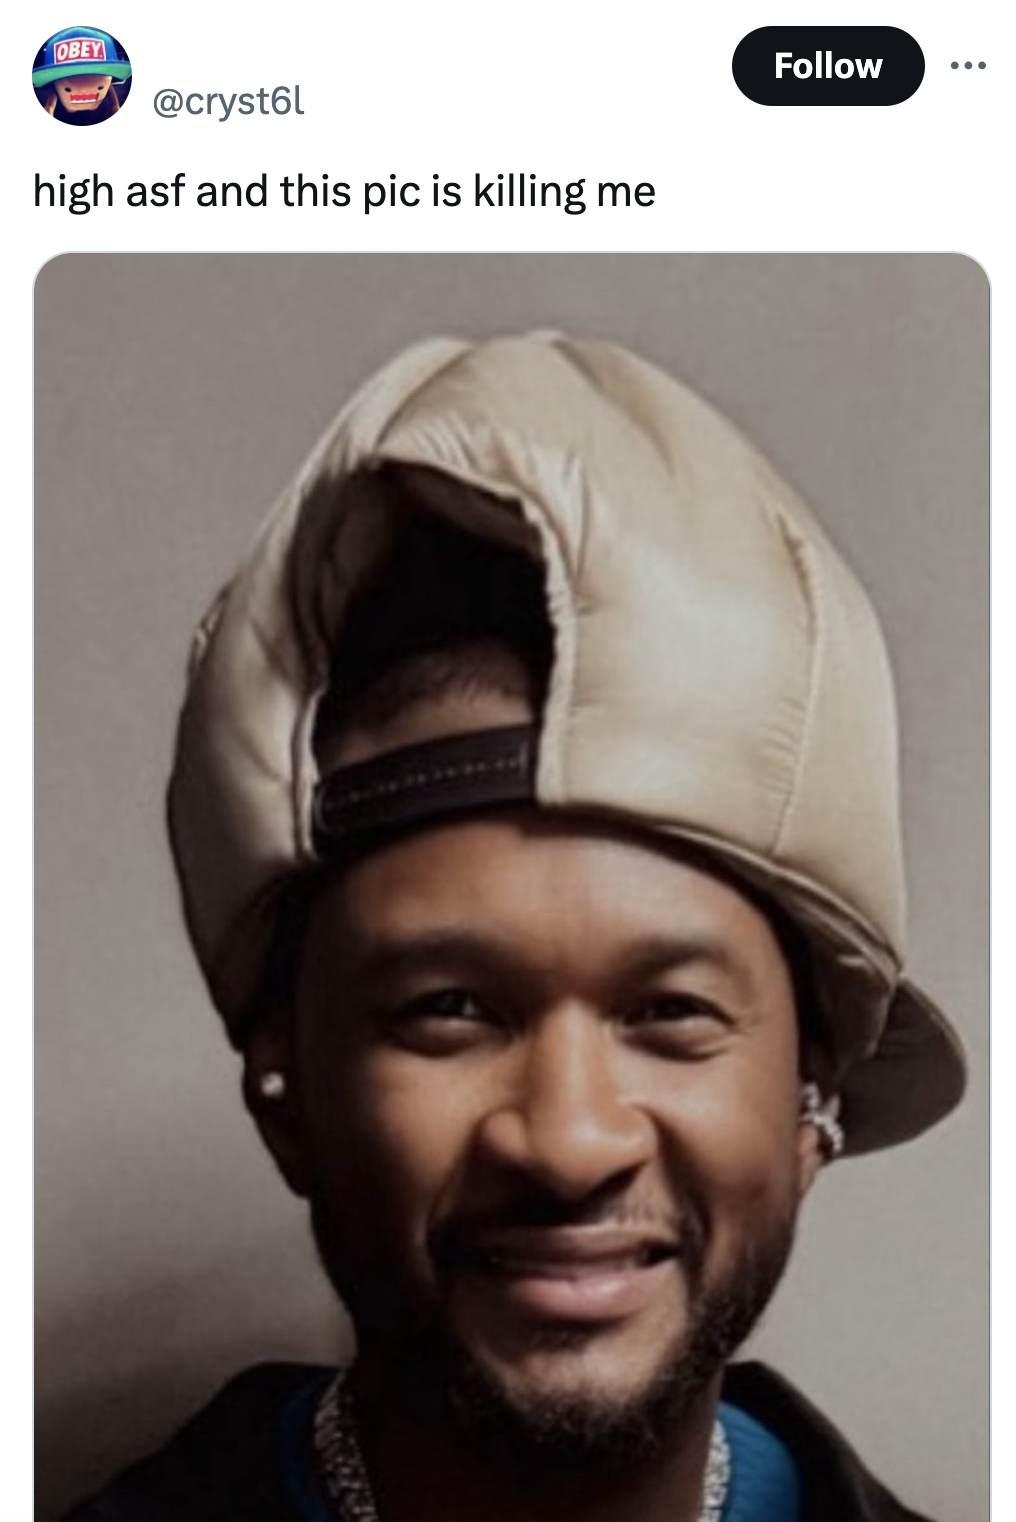 usher puffer hat - high asf and this pic is killing me